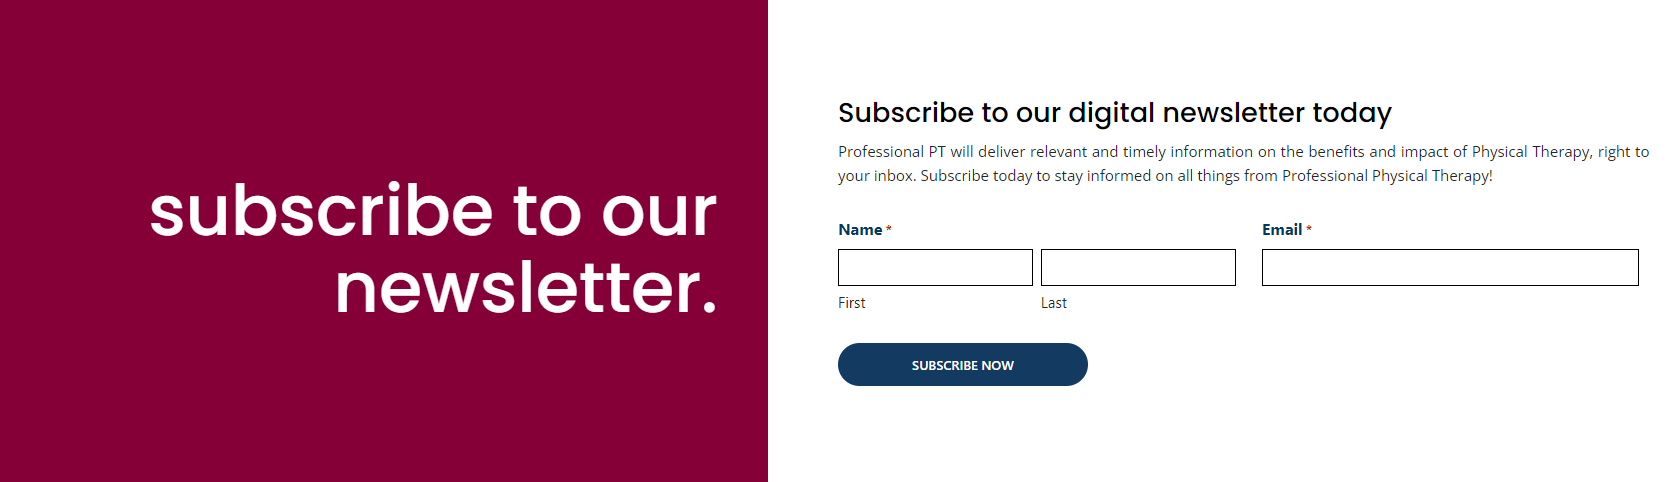 Newsletter section in a physical therapsit website